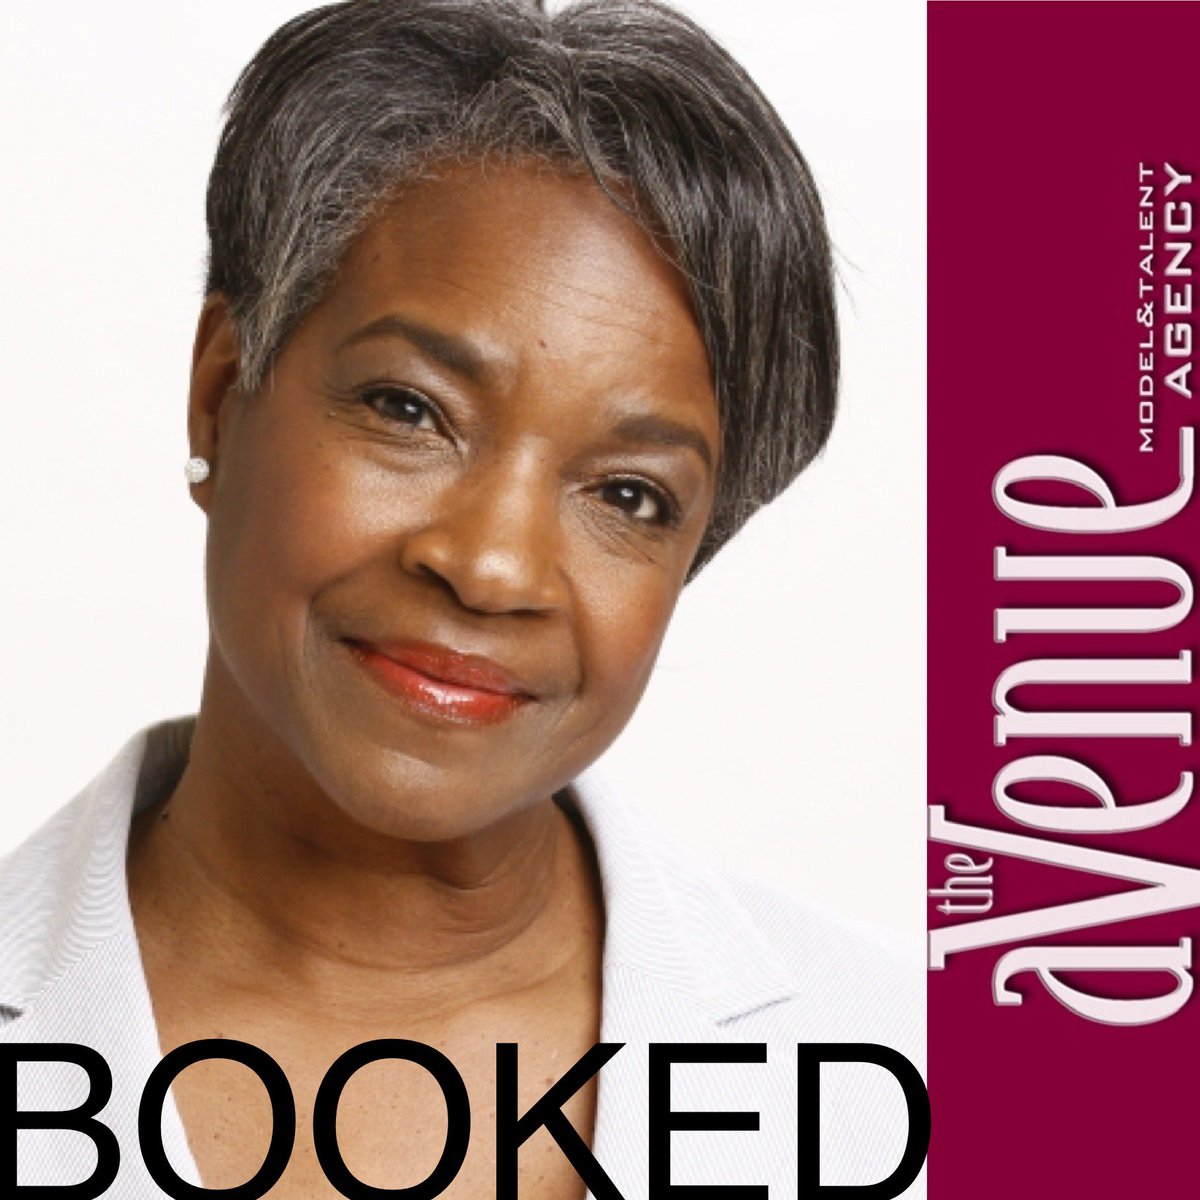 #BOOKED Yay! LYNN SUMMERS is booked on a national commercial!🤭🩷🩷 
Her sunny disposition landed her on set for an awesome project!☀️🎉

 #TheAvenue #TheAvenueAgency #film #tv #acting #ATLActors #AtlantaActors #onset #setlife #bookedandbusy #atlantacasting #workingactors